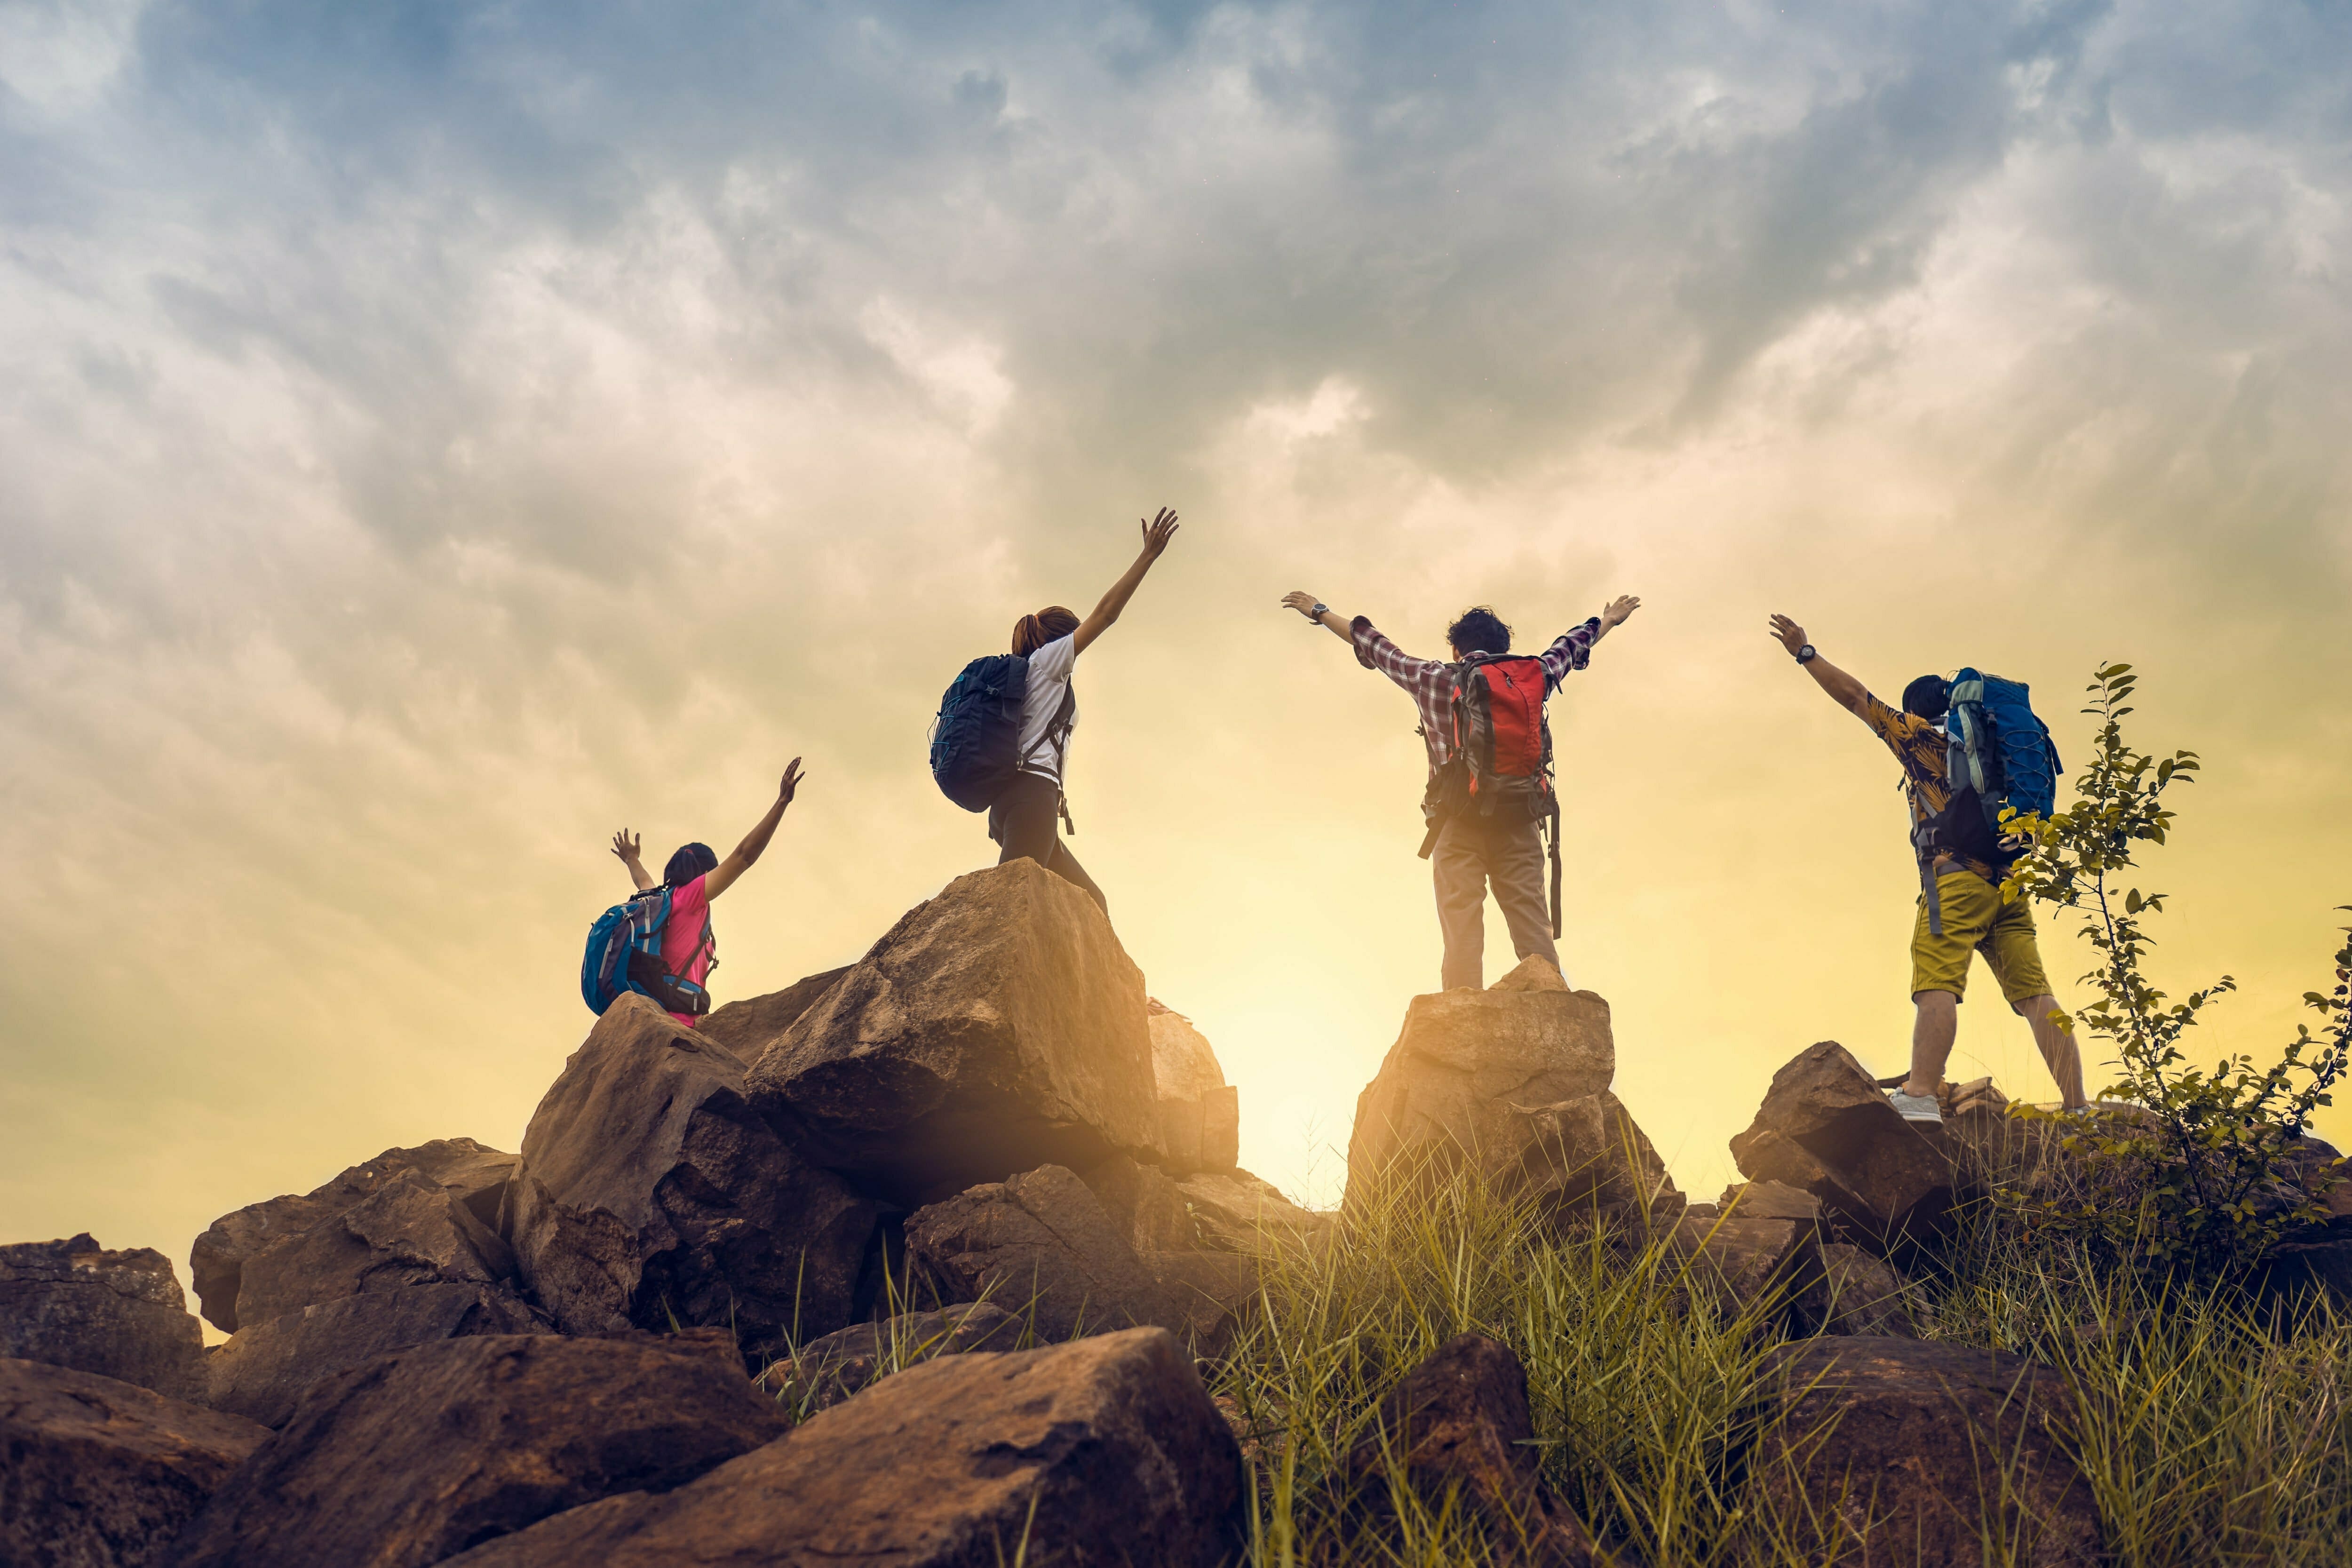 A group of hikers standing on top of a rock during their rehab journey, with their arms raised in celebration.